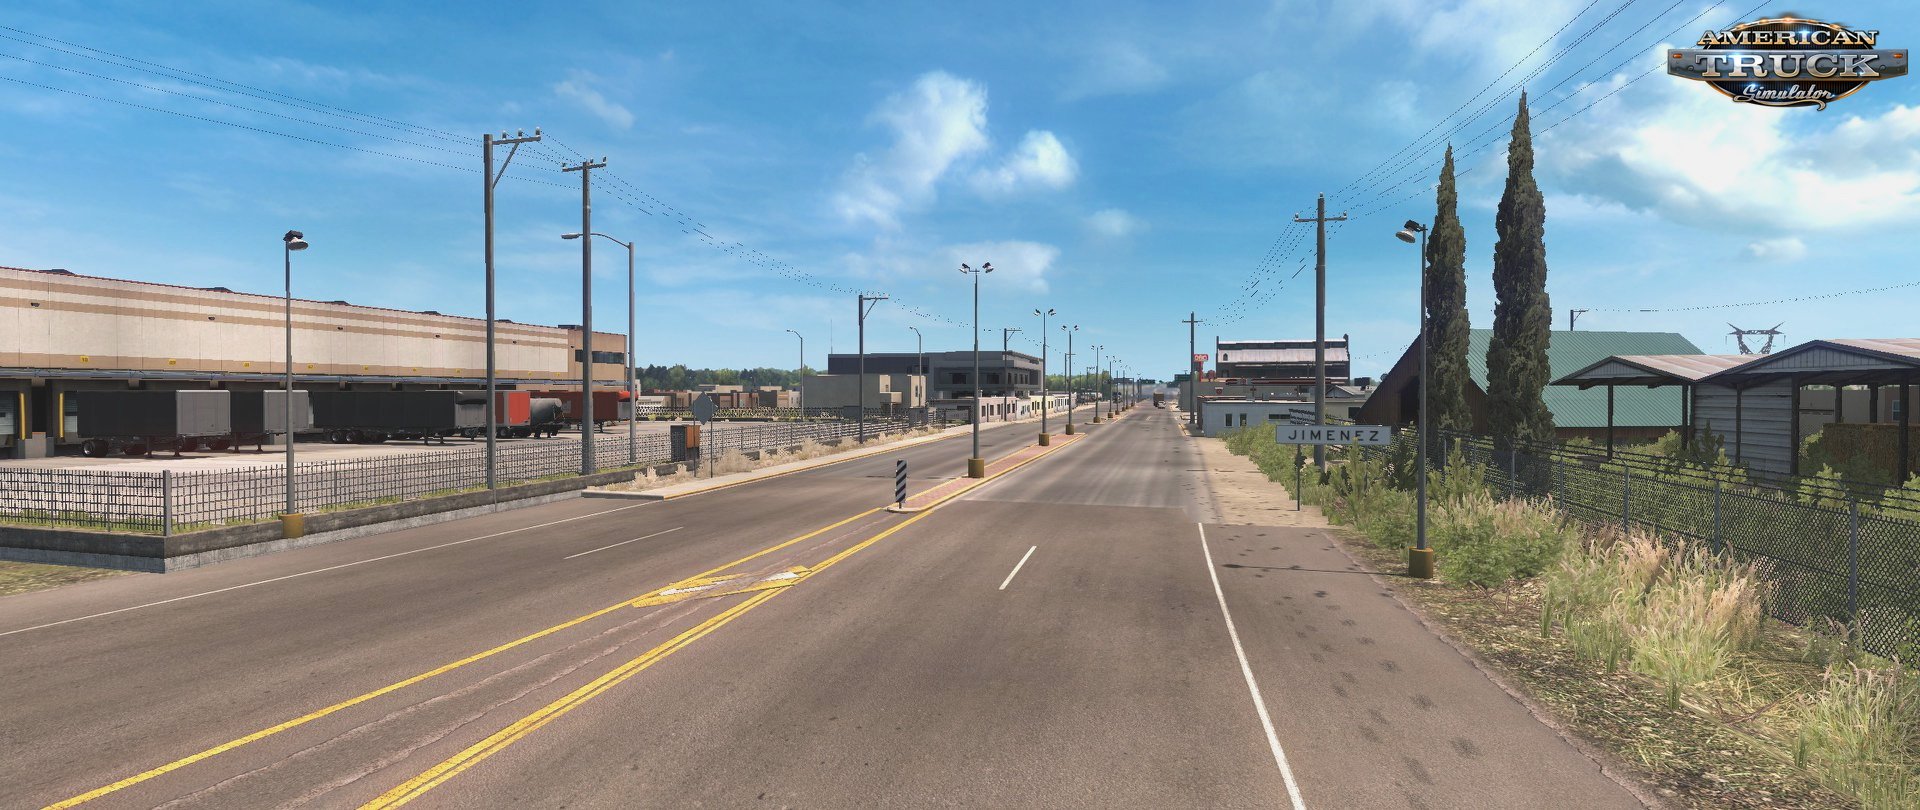 Mexico Extremo Map v2.0.5 (Update) for ATS (1.32.x)